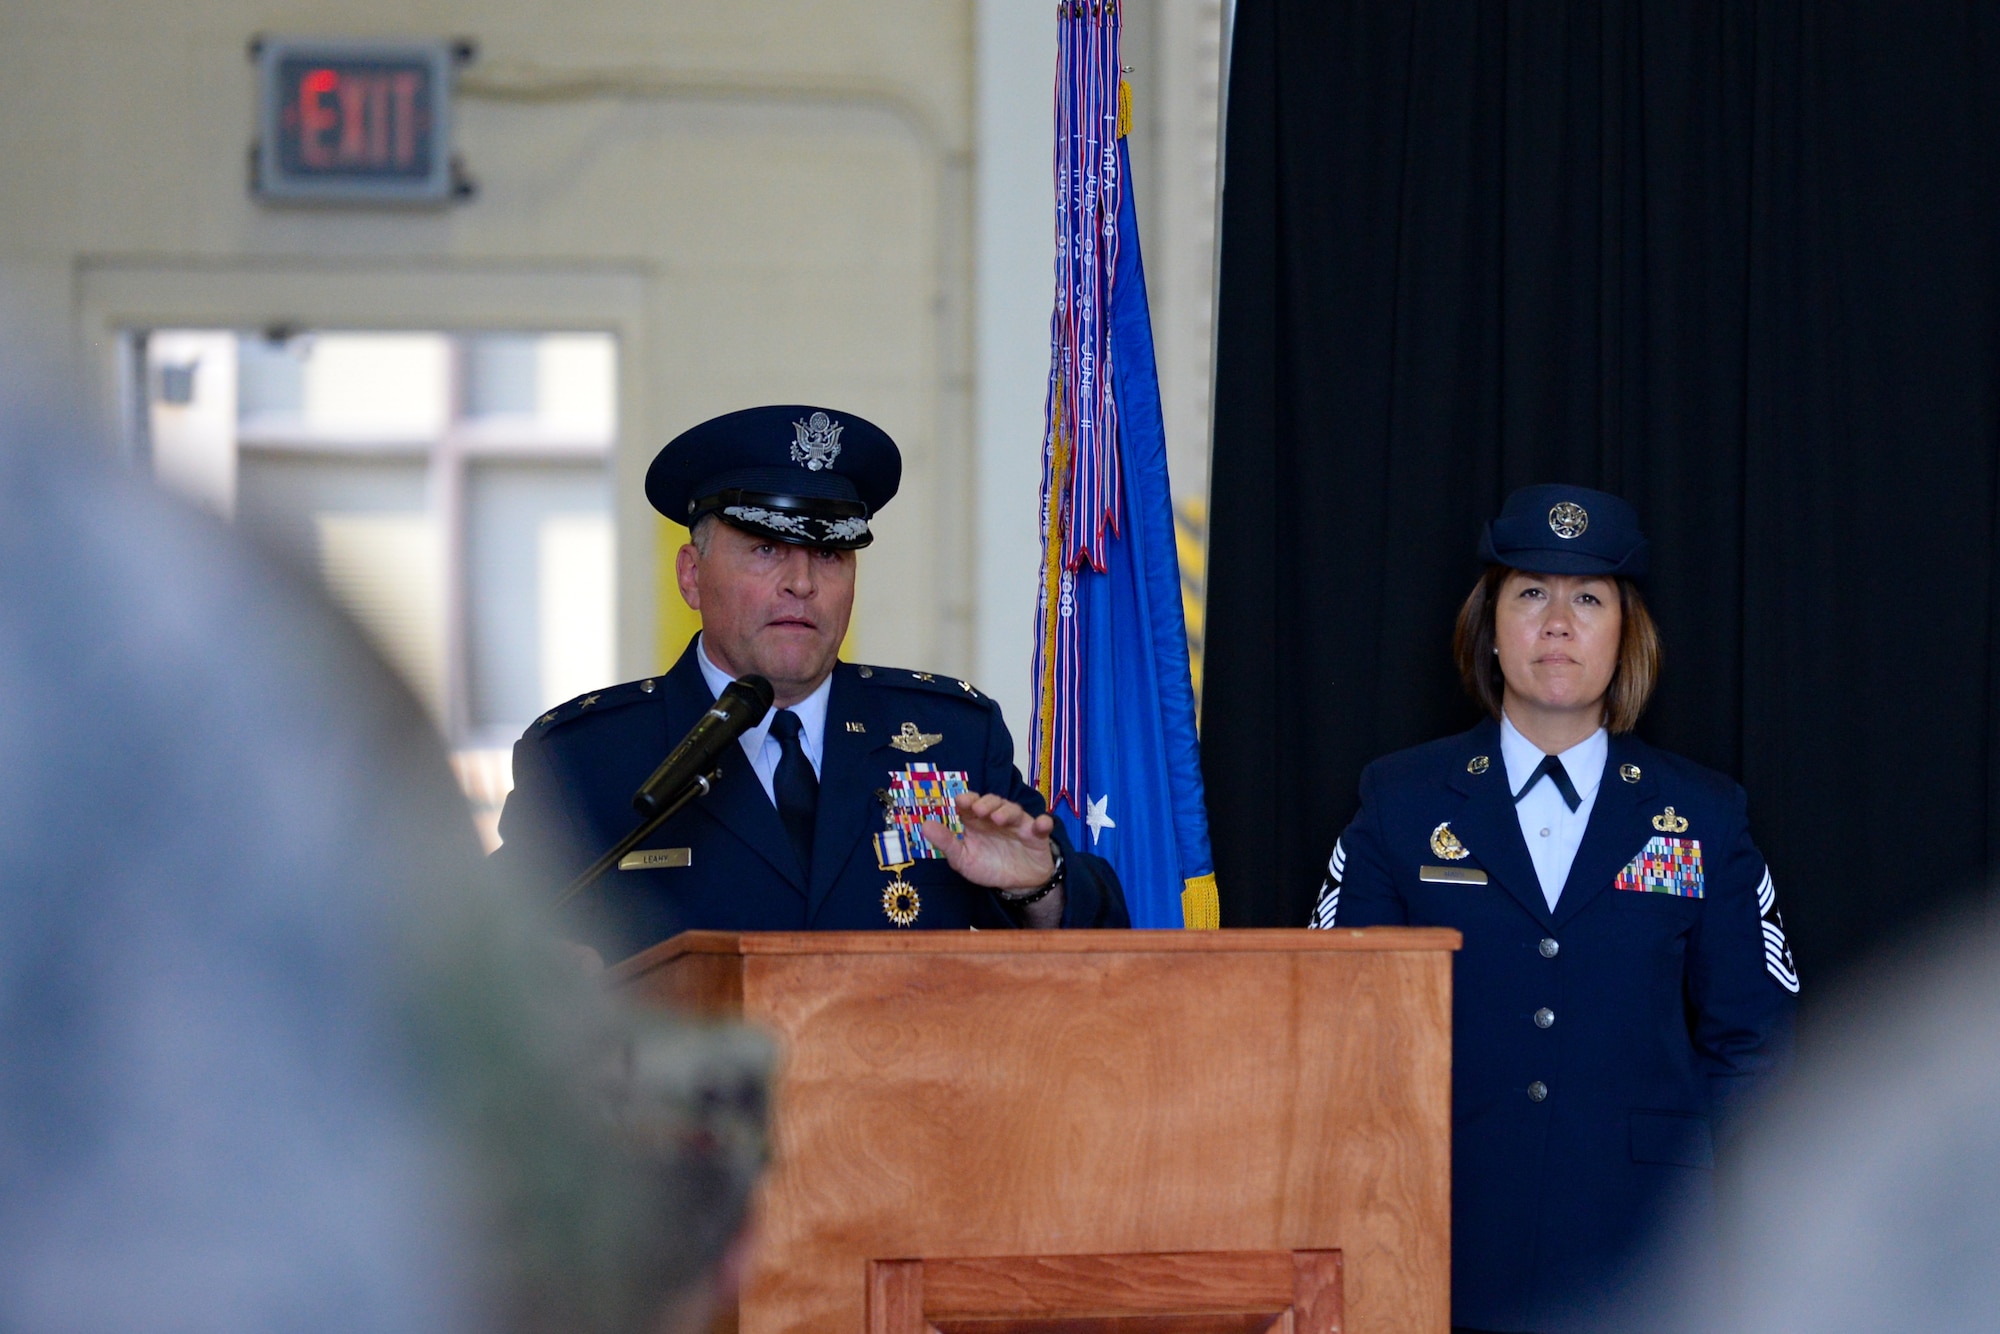 U.S. Air Force Maj. Gen. Timothy Leahy, Second Air Force commander, delivers remarks during the Second Air Force change of command ceremony on Keesler Air Force Base, Mississippi, Aug. 29, 2019. The ceremony is a symbol of command being exchanged from one commander to the next. Leahy relinquished command of the Second Air Force to Maj. Gen. Andrea Tullos. (U.S. Air Force photo by
Airman 1st Class Spencer Tobler)